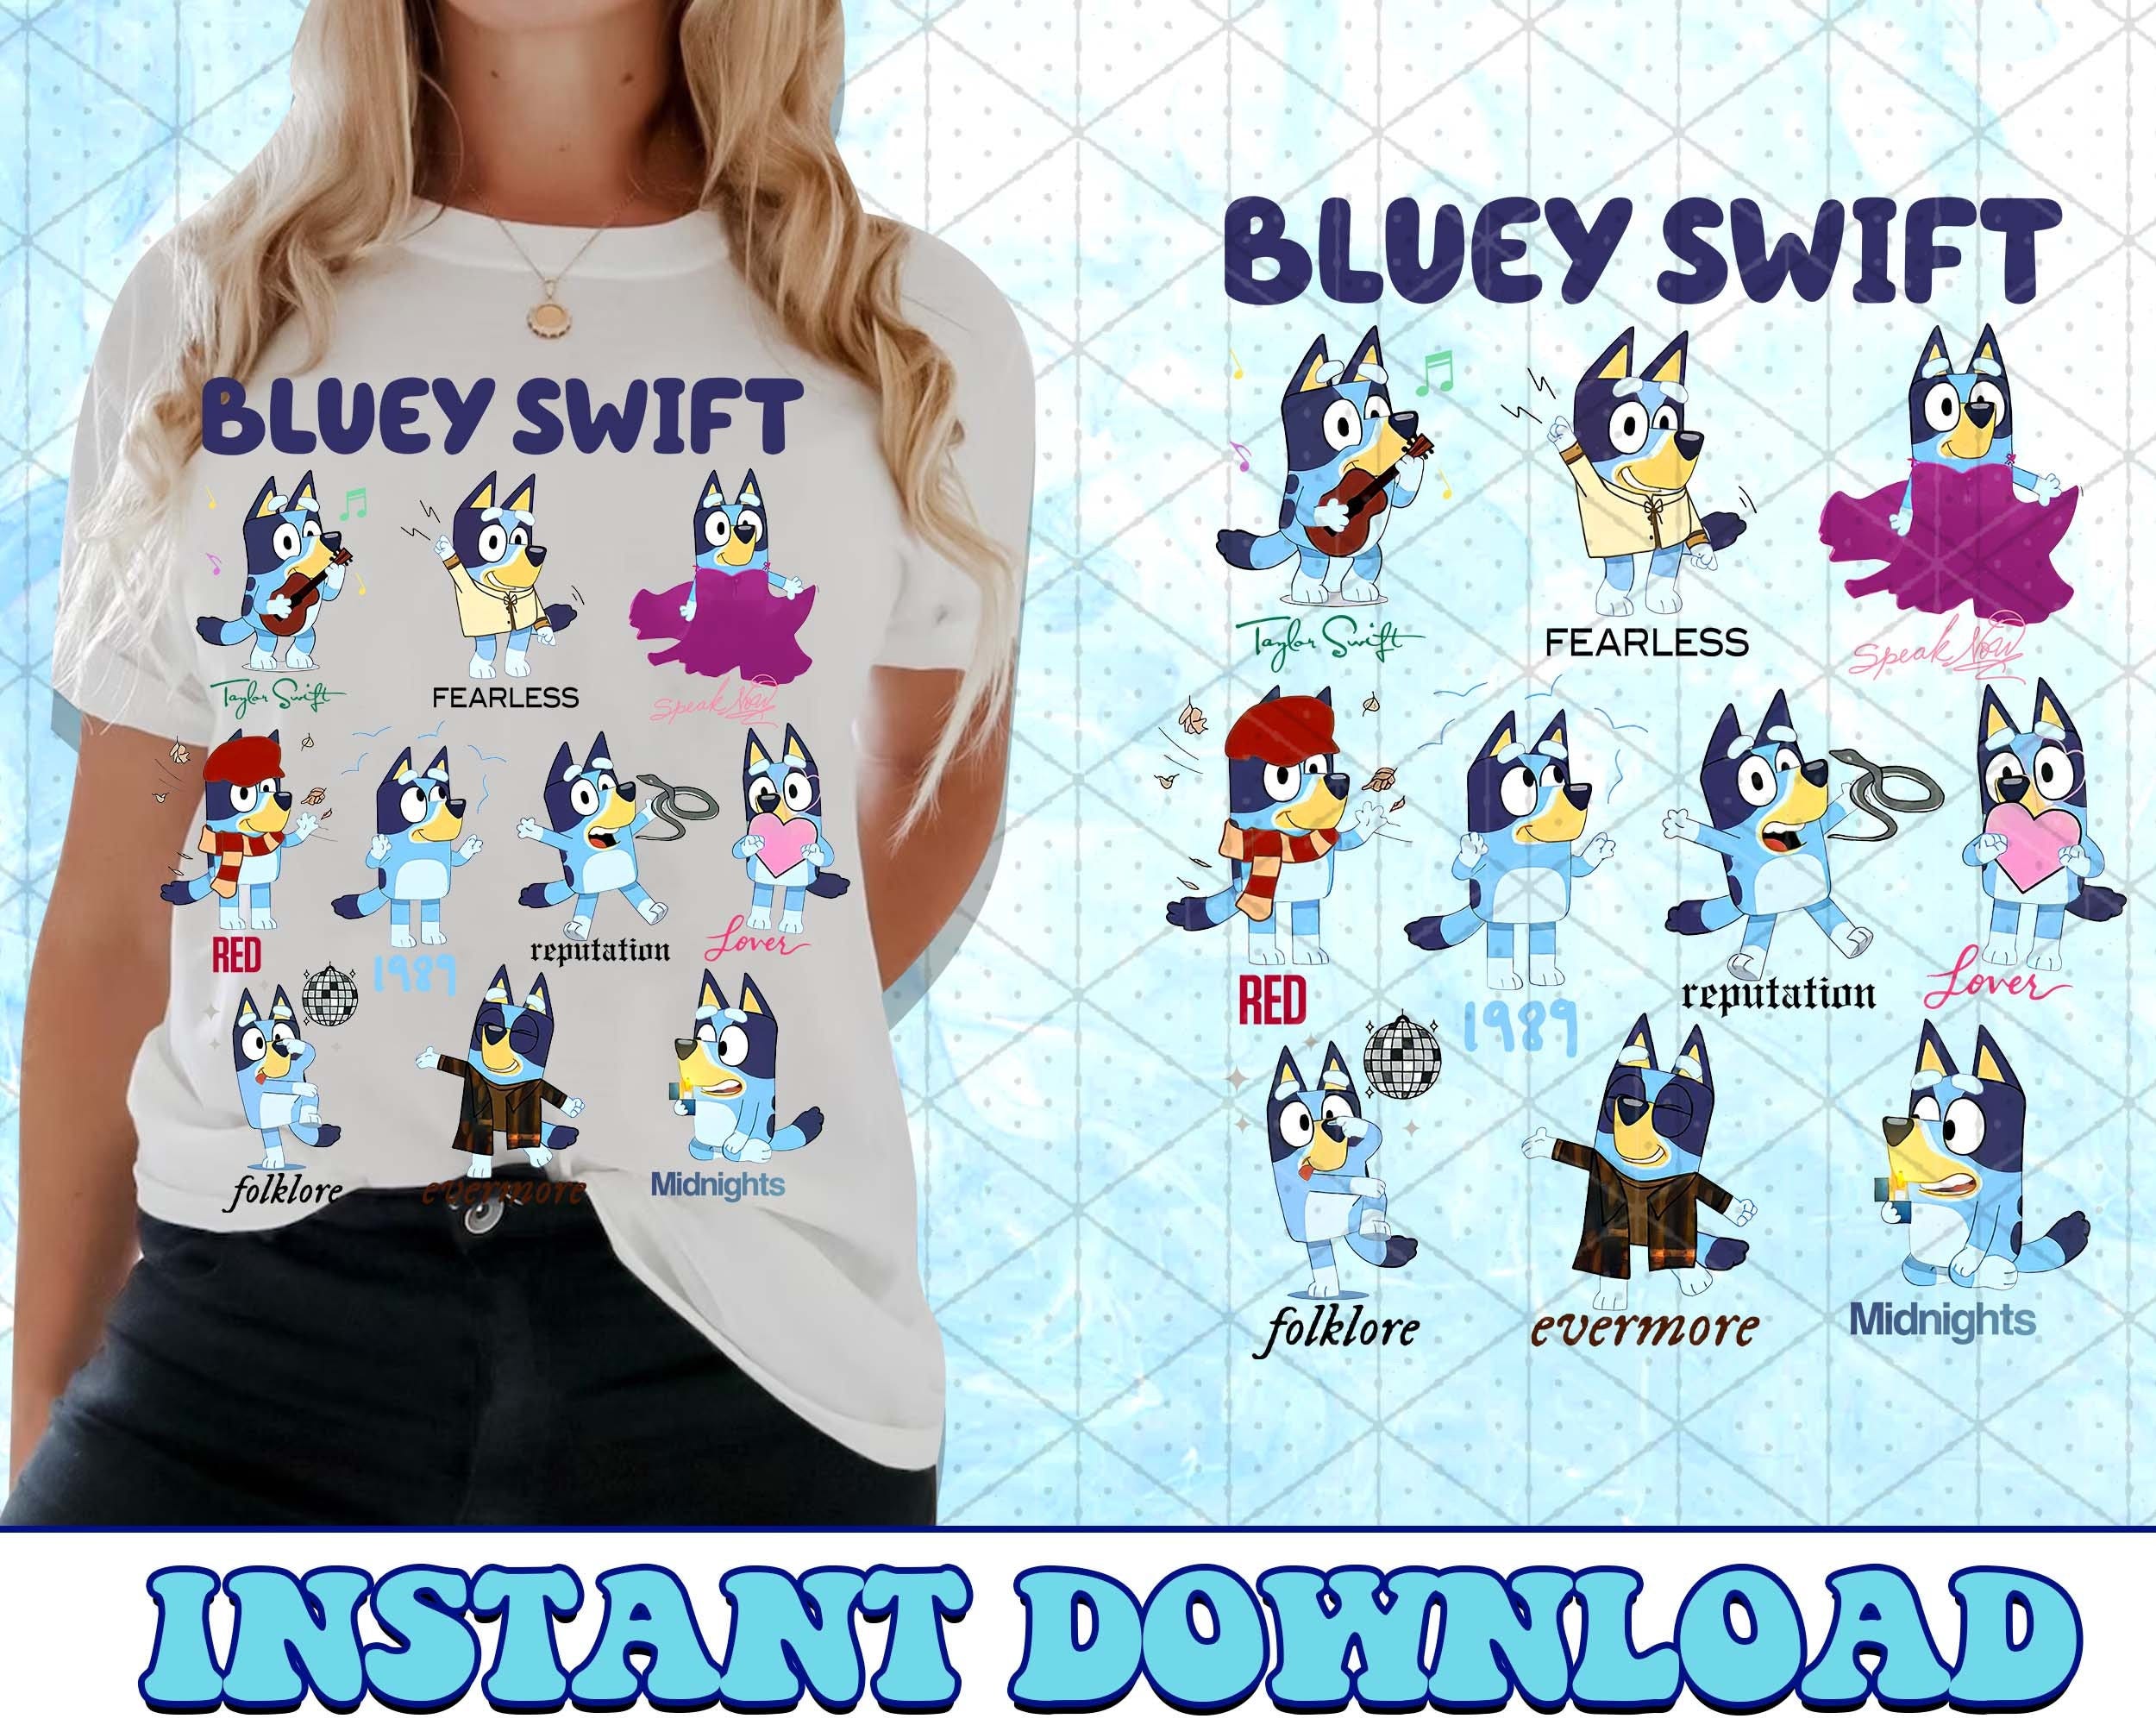 Bluey Swift PNG, Bluey Family PNG, Swiftie Bluey Png, Bluey Bingo Png, Bluey Mom Png, Bluey Dad Png, Bluey Friends Png, Bluey PNG